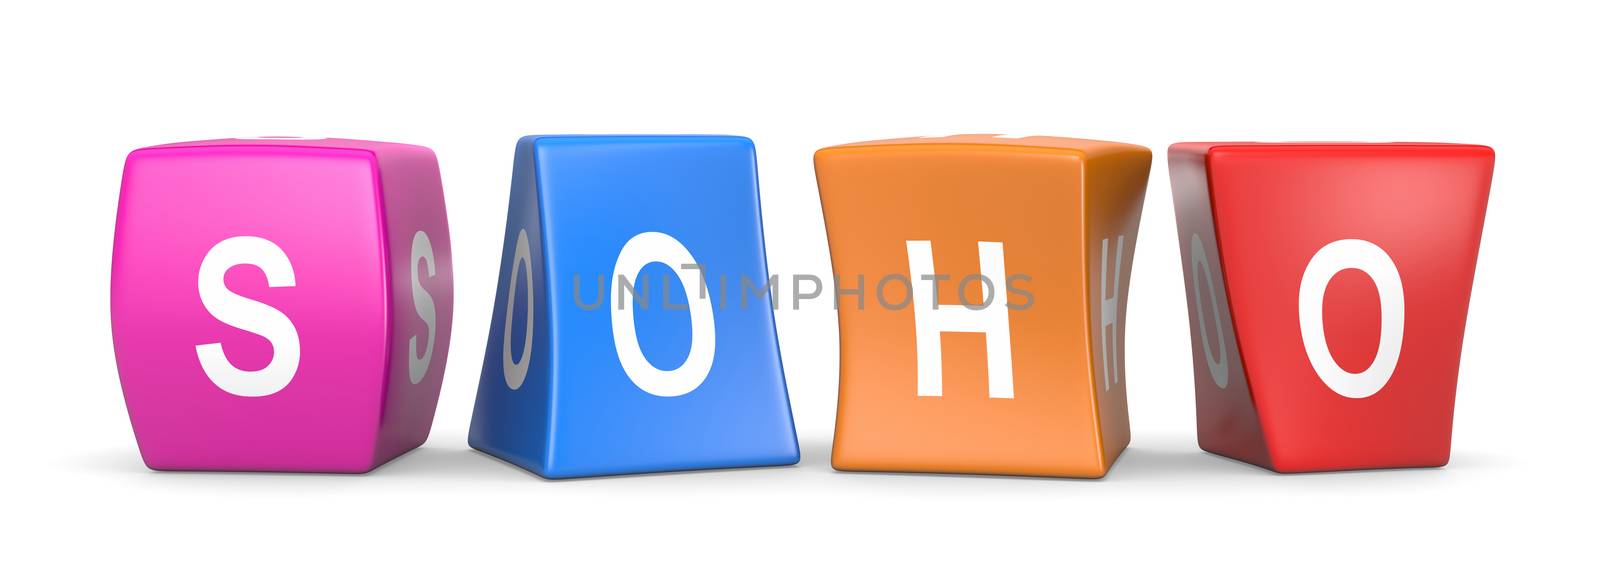 SOHO White Text on Colorful Deformed Funny Cubes 3D Illustration on White Background